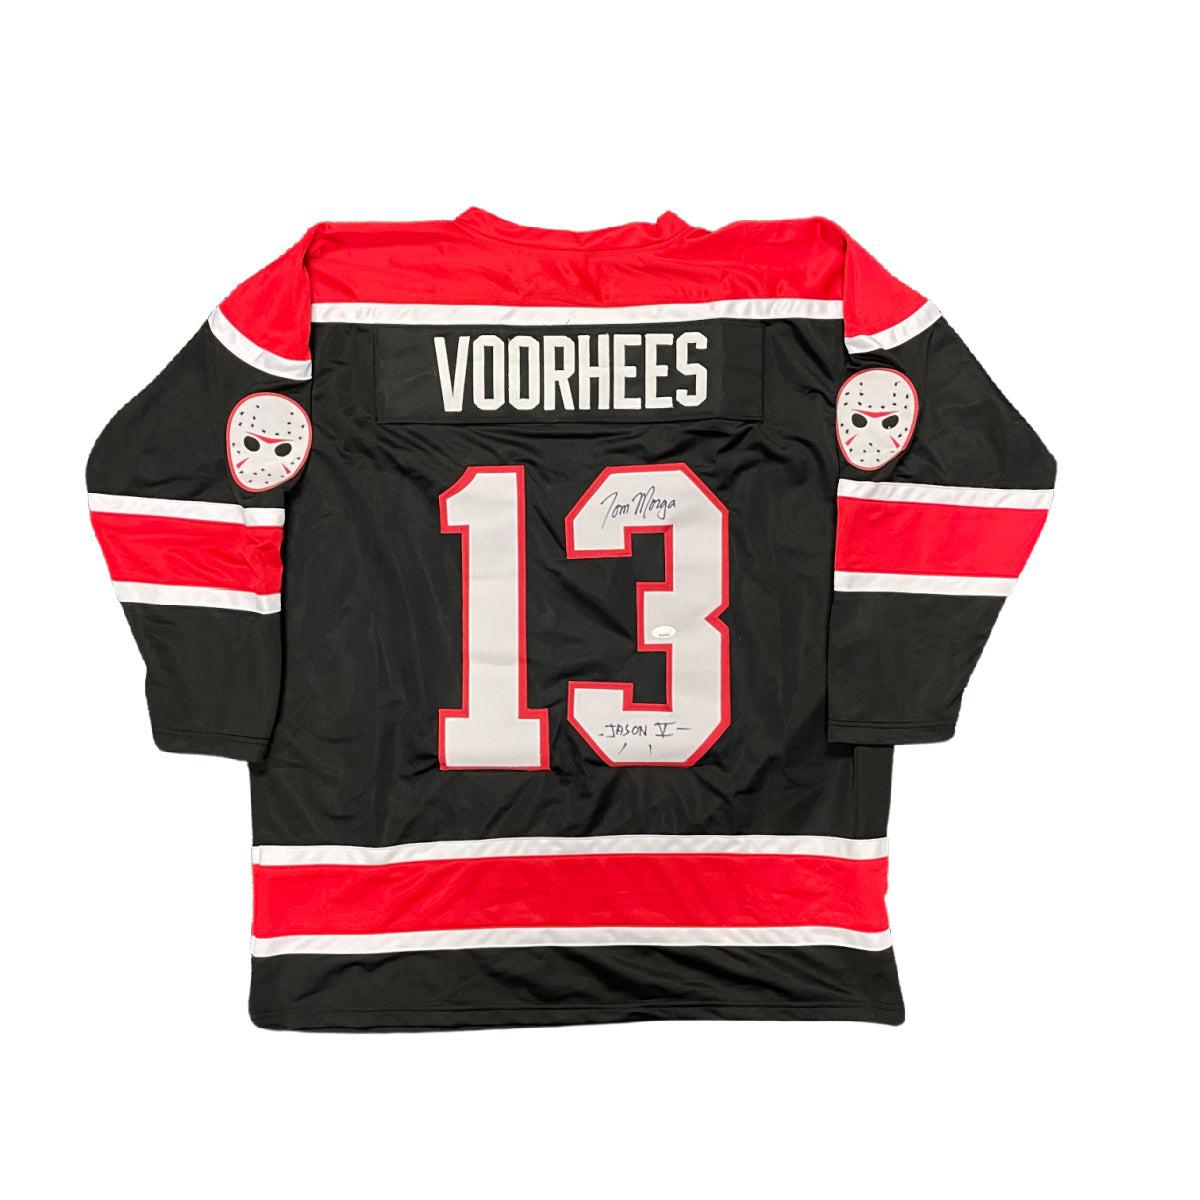 Tom Morga Signed Custom Jason Voorhees Jersey XL Friday the 13th Autographed JSA